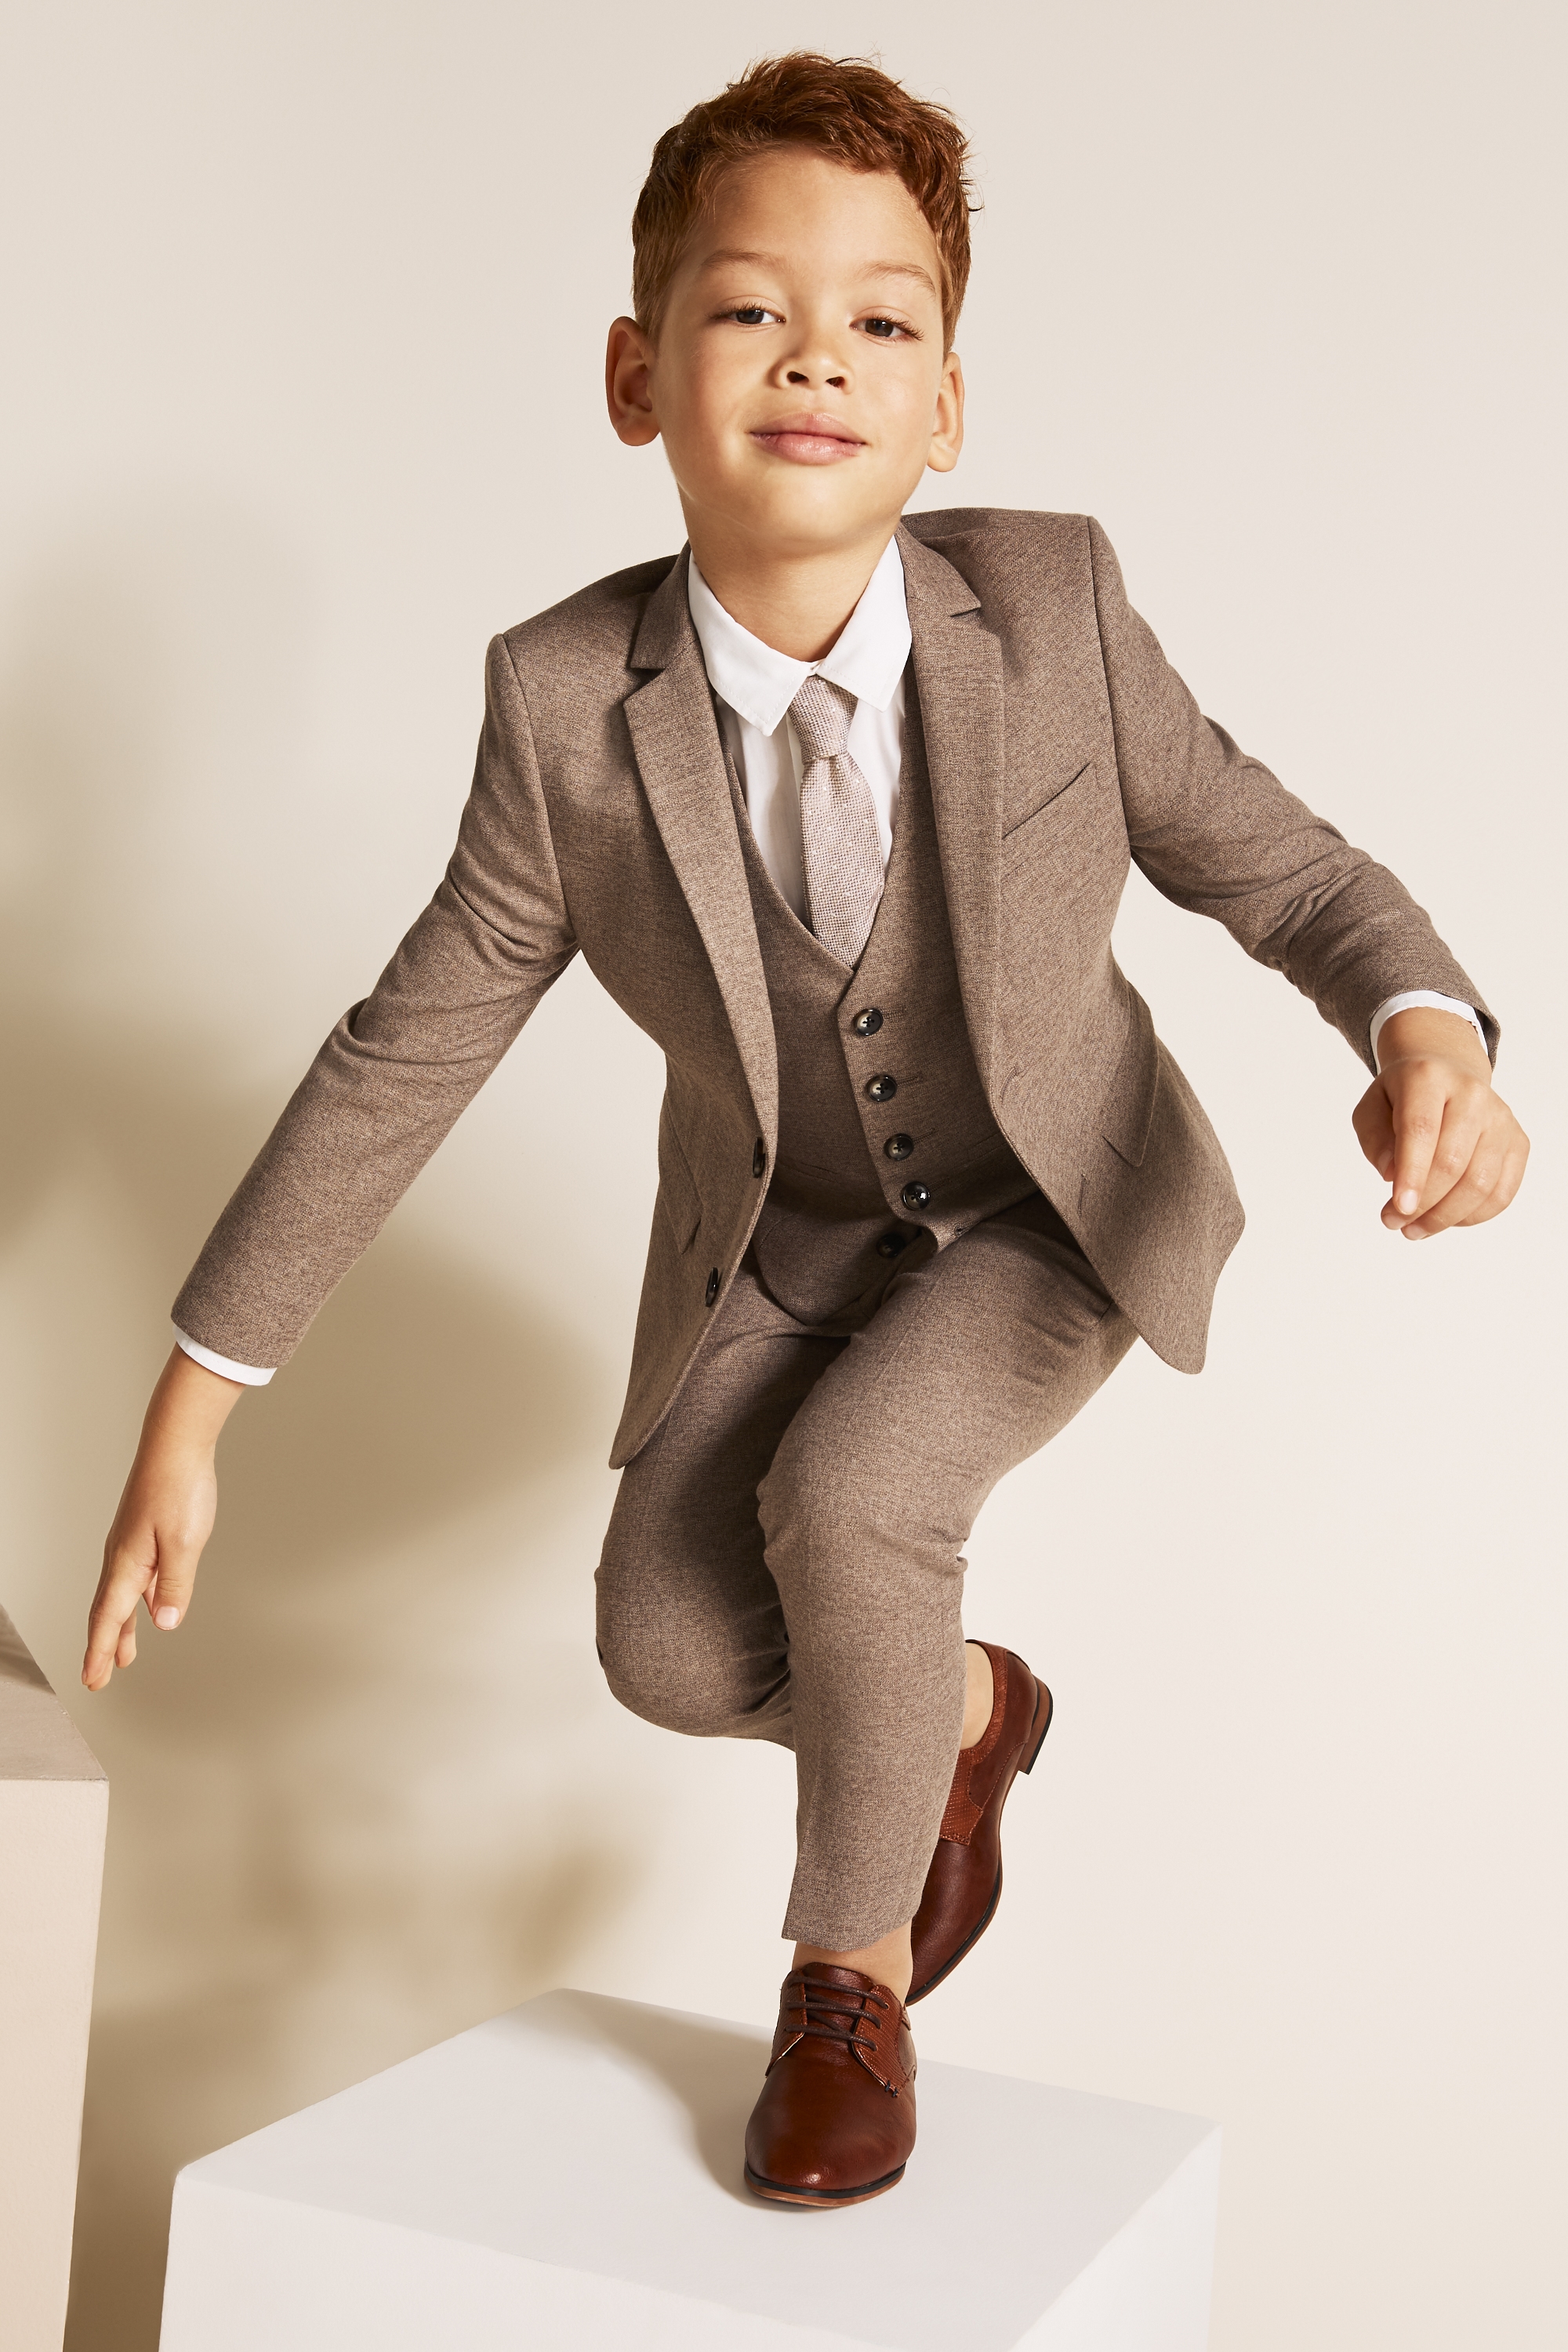 Details about  / SGTOYS S-021A 1//6 Brown Jacket Shirt Trousers Suit Fit 12/'/' Narrow Shoulder Body